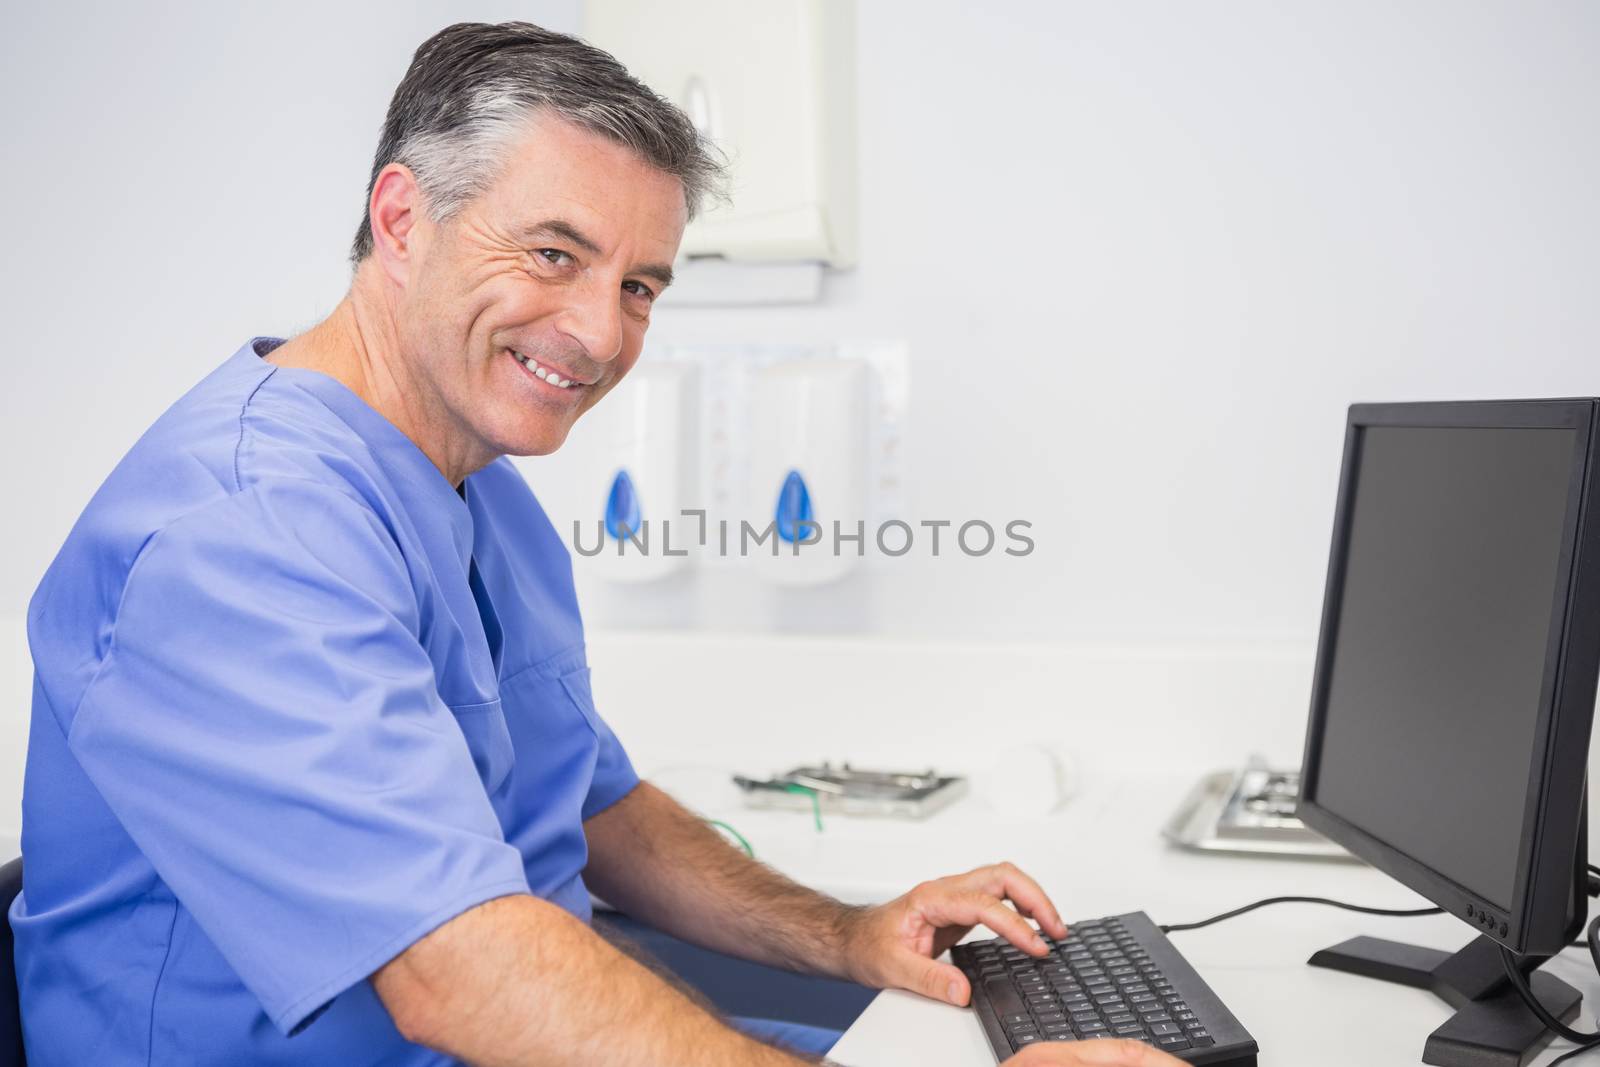 Smiling dentist sitting and using computer by Wavebreakmedia